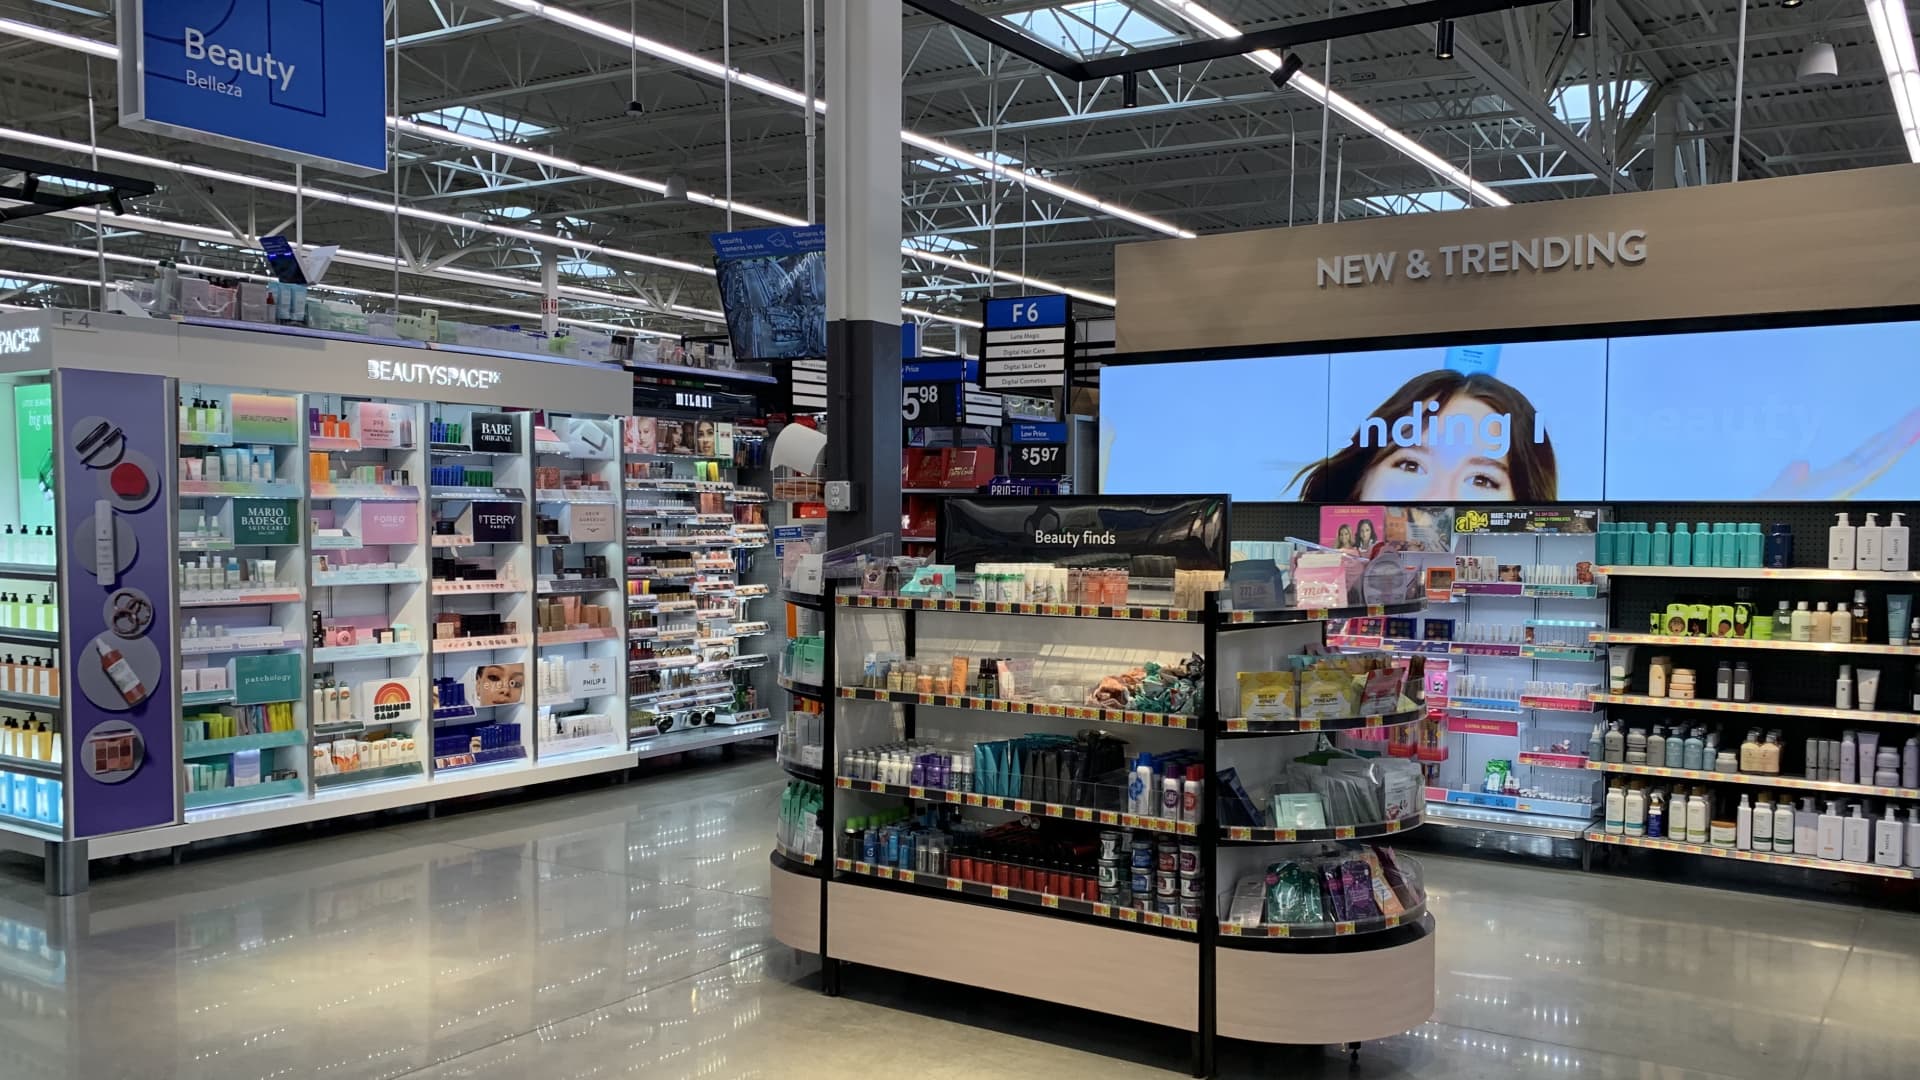 Walmart's new store design showcases a lot of discretionary merchandise that typically has a higher profit margin that groceries, including makeup and other beauty items.